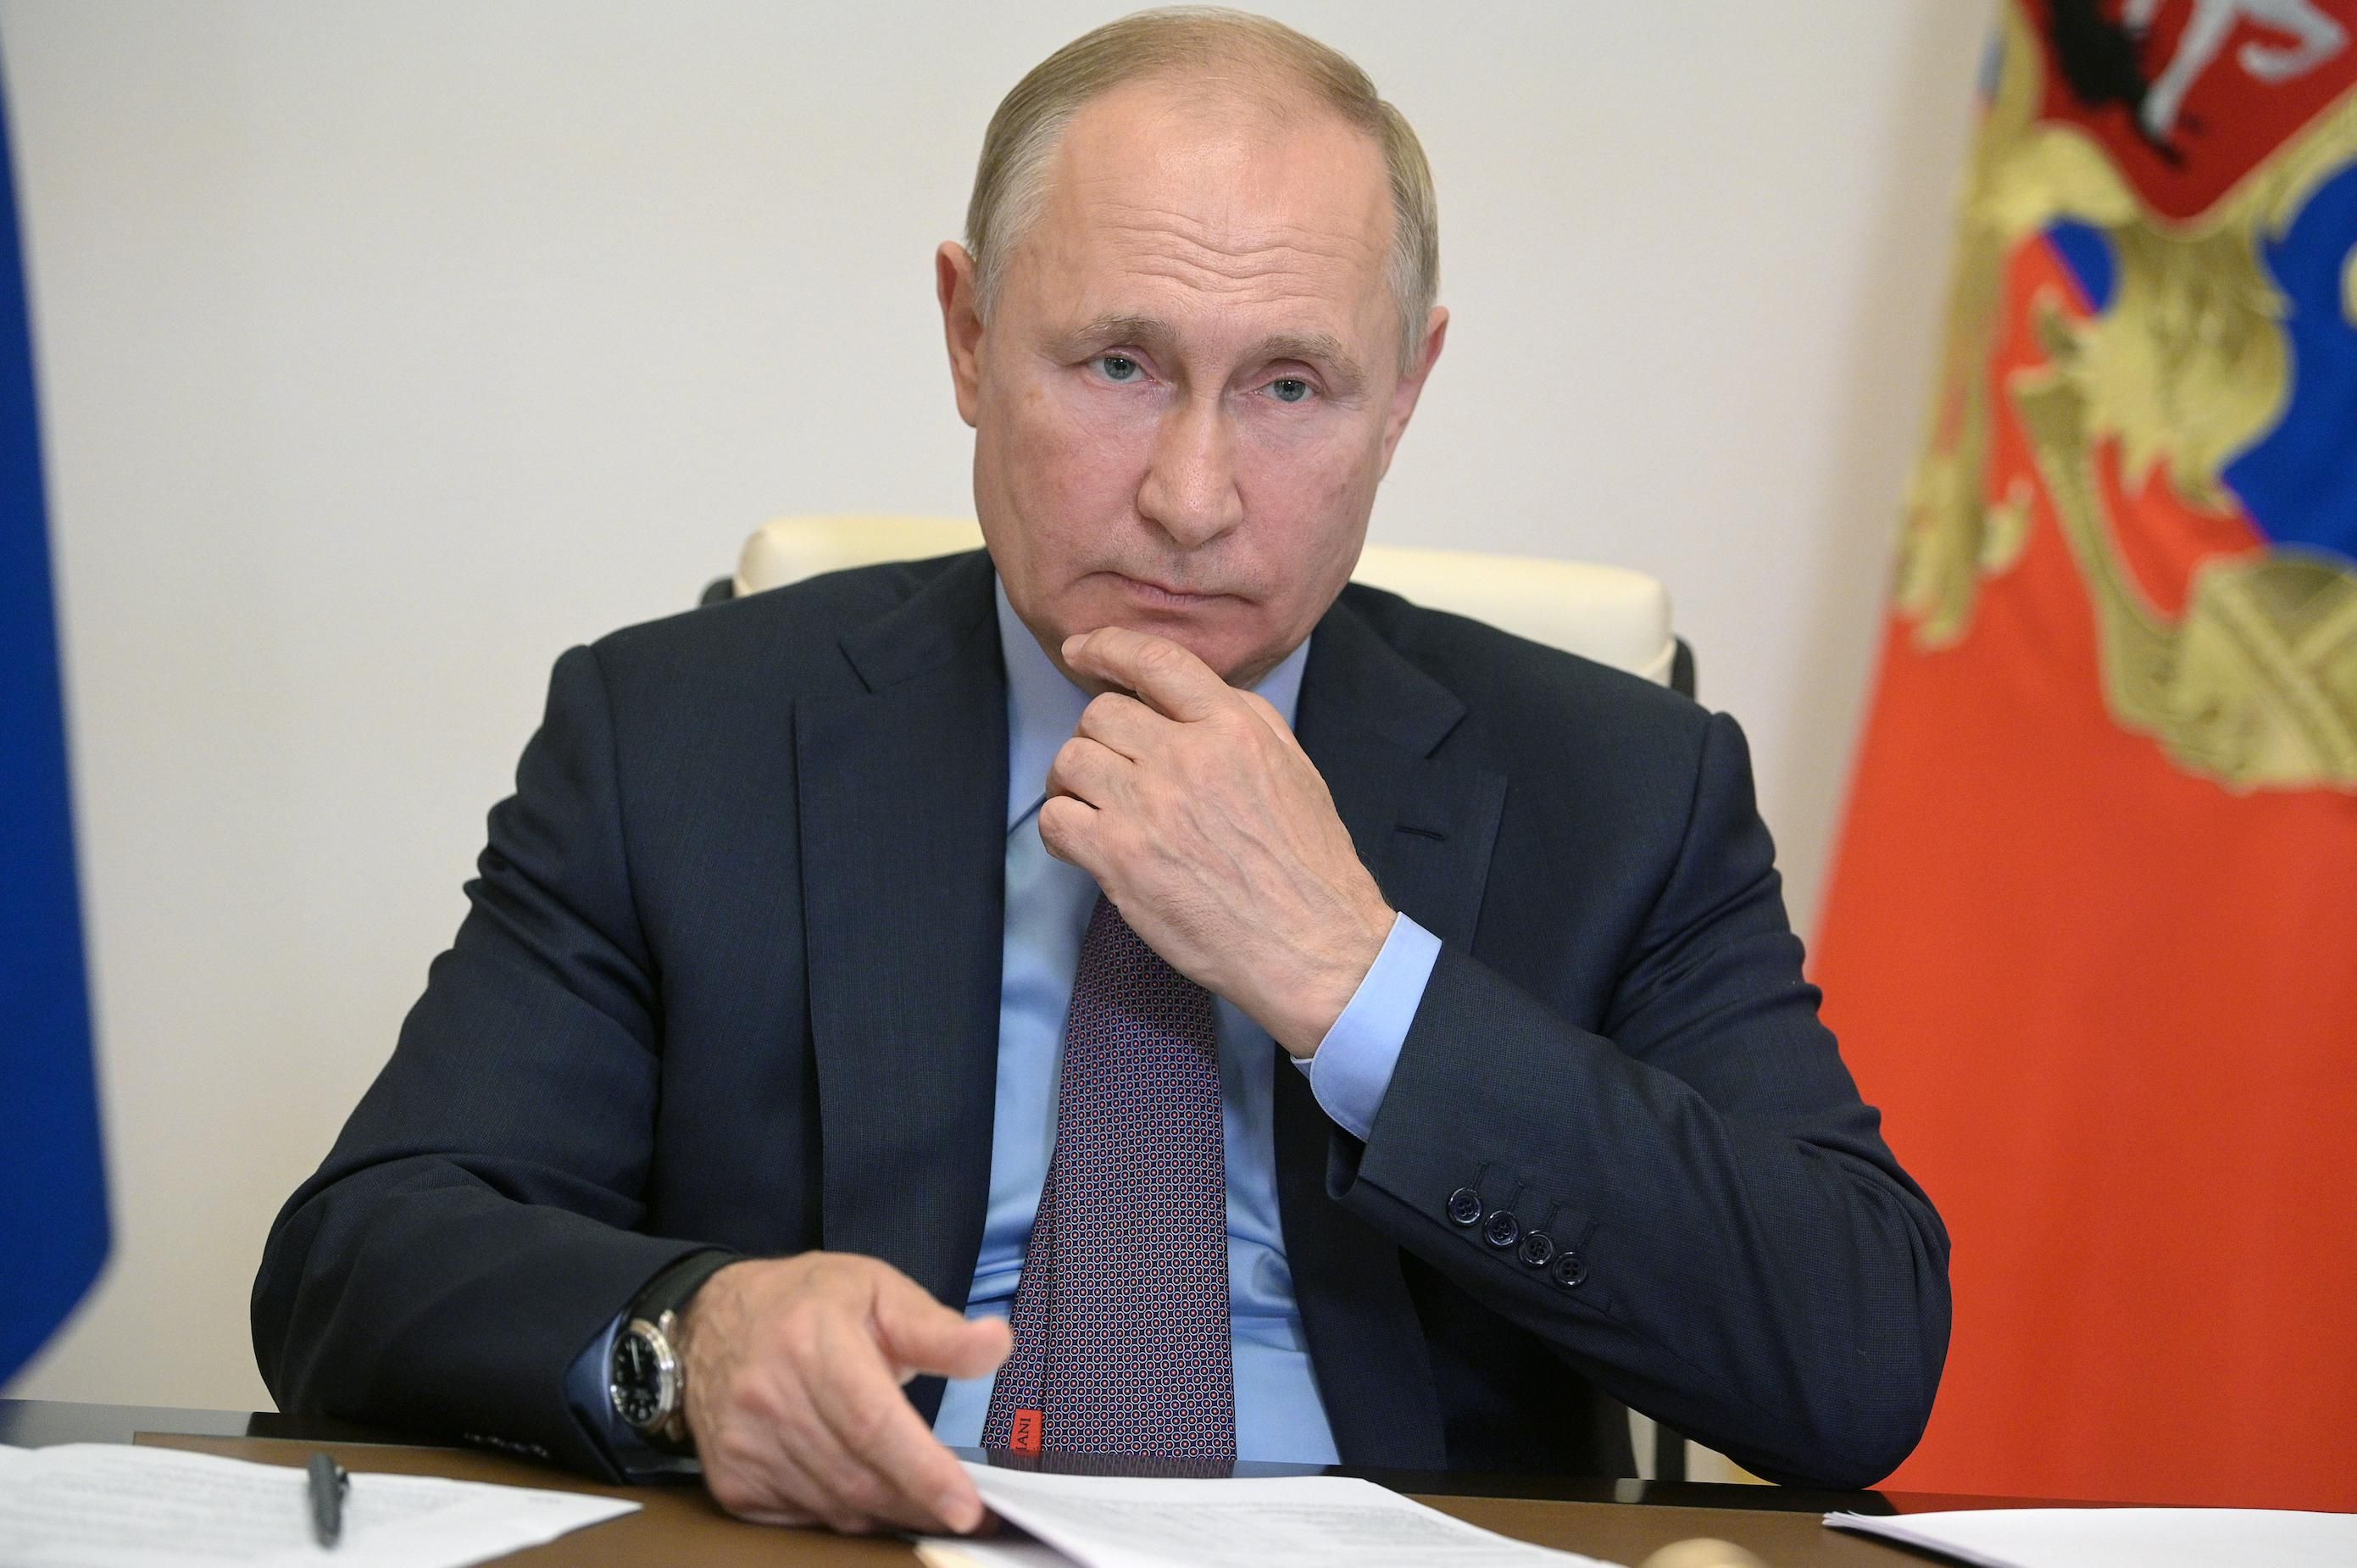 Russia’s President Vladimir Putin is seen in his office in the Novo-Ogaryovo residence during a videoconference meeting